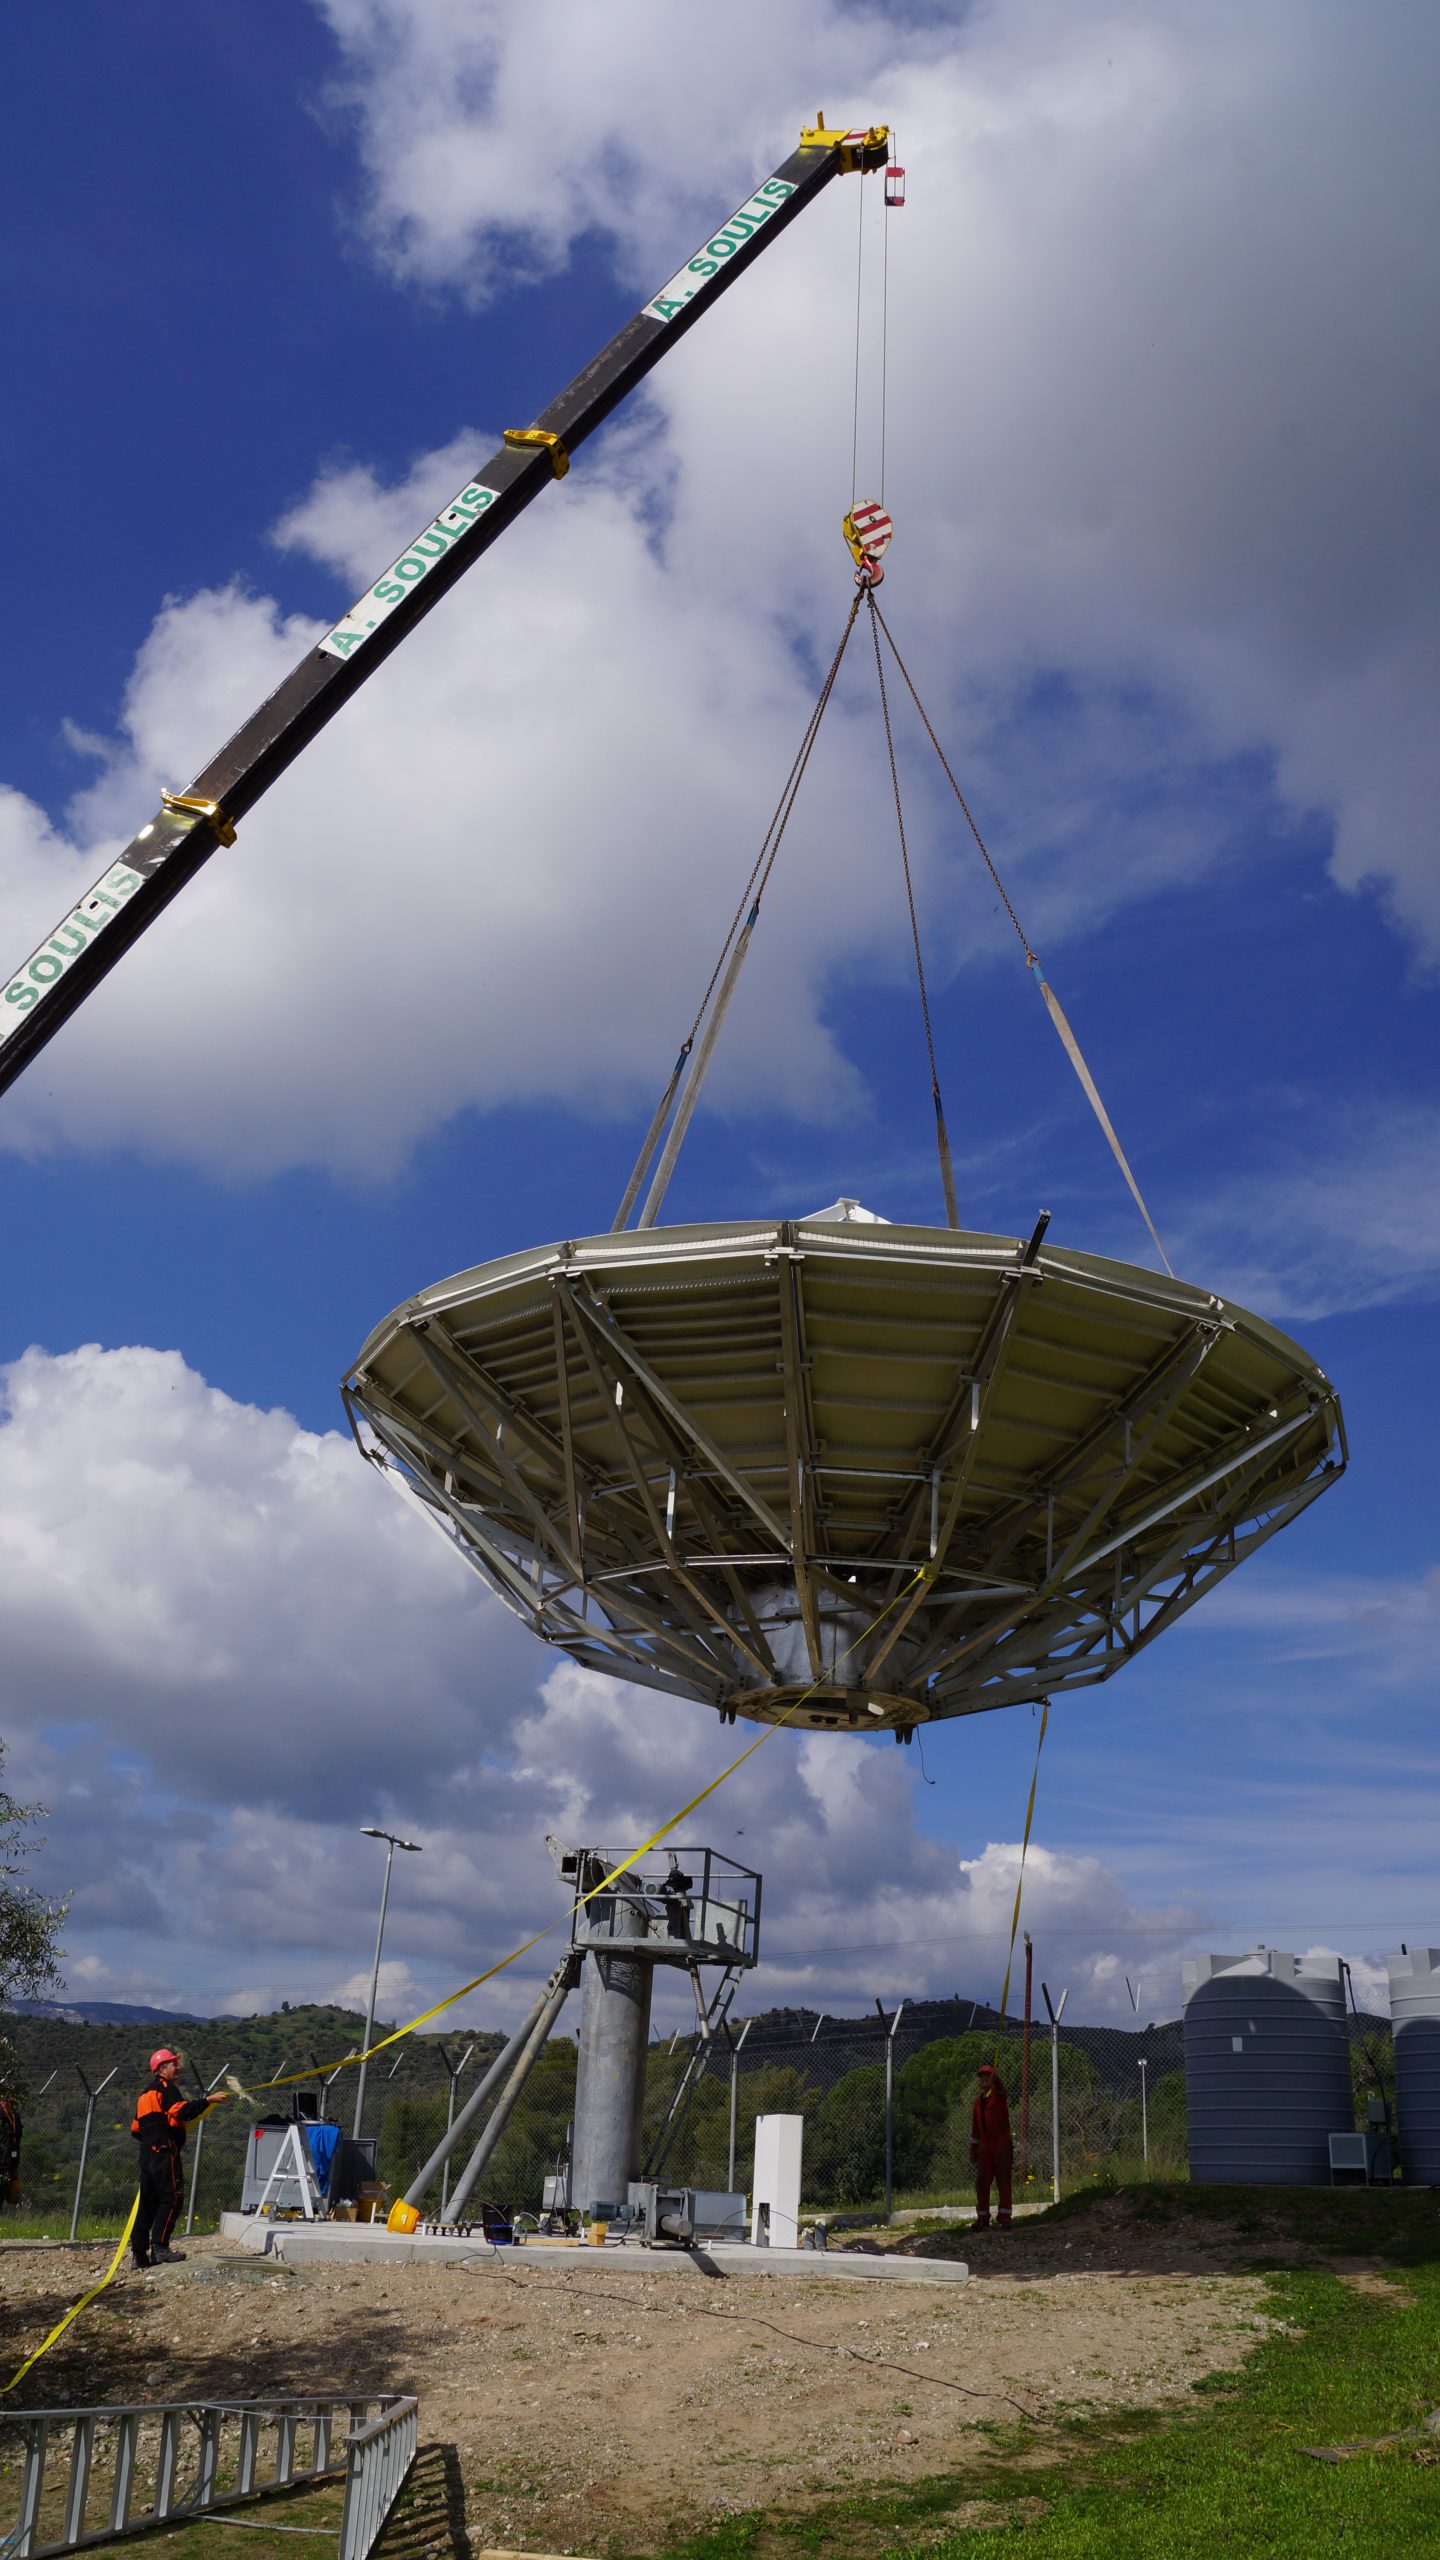 A refurbished VertexRSI 9.0m DBS-band antenna assembled at the Hella-Sat Teleport on Cyprus.